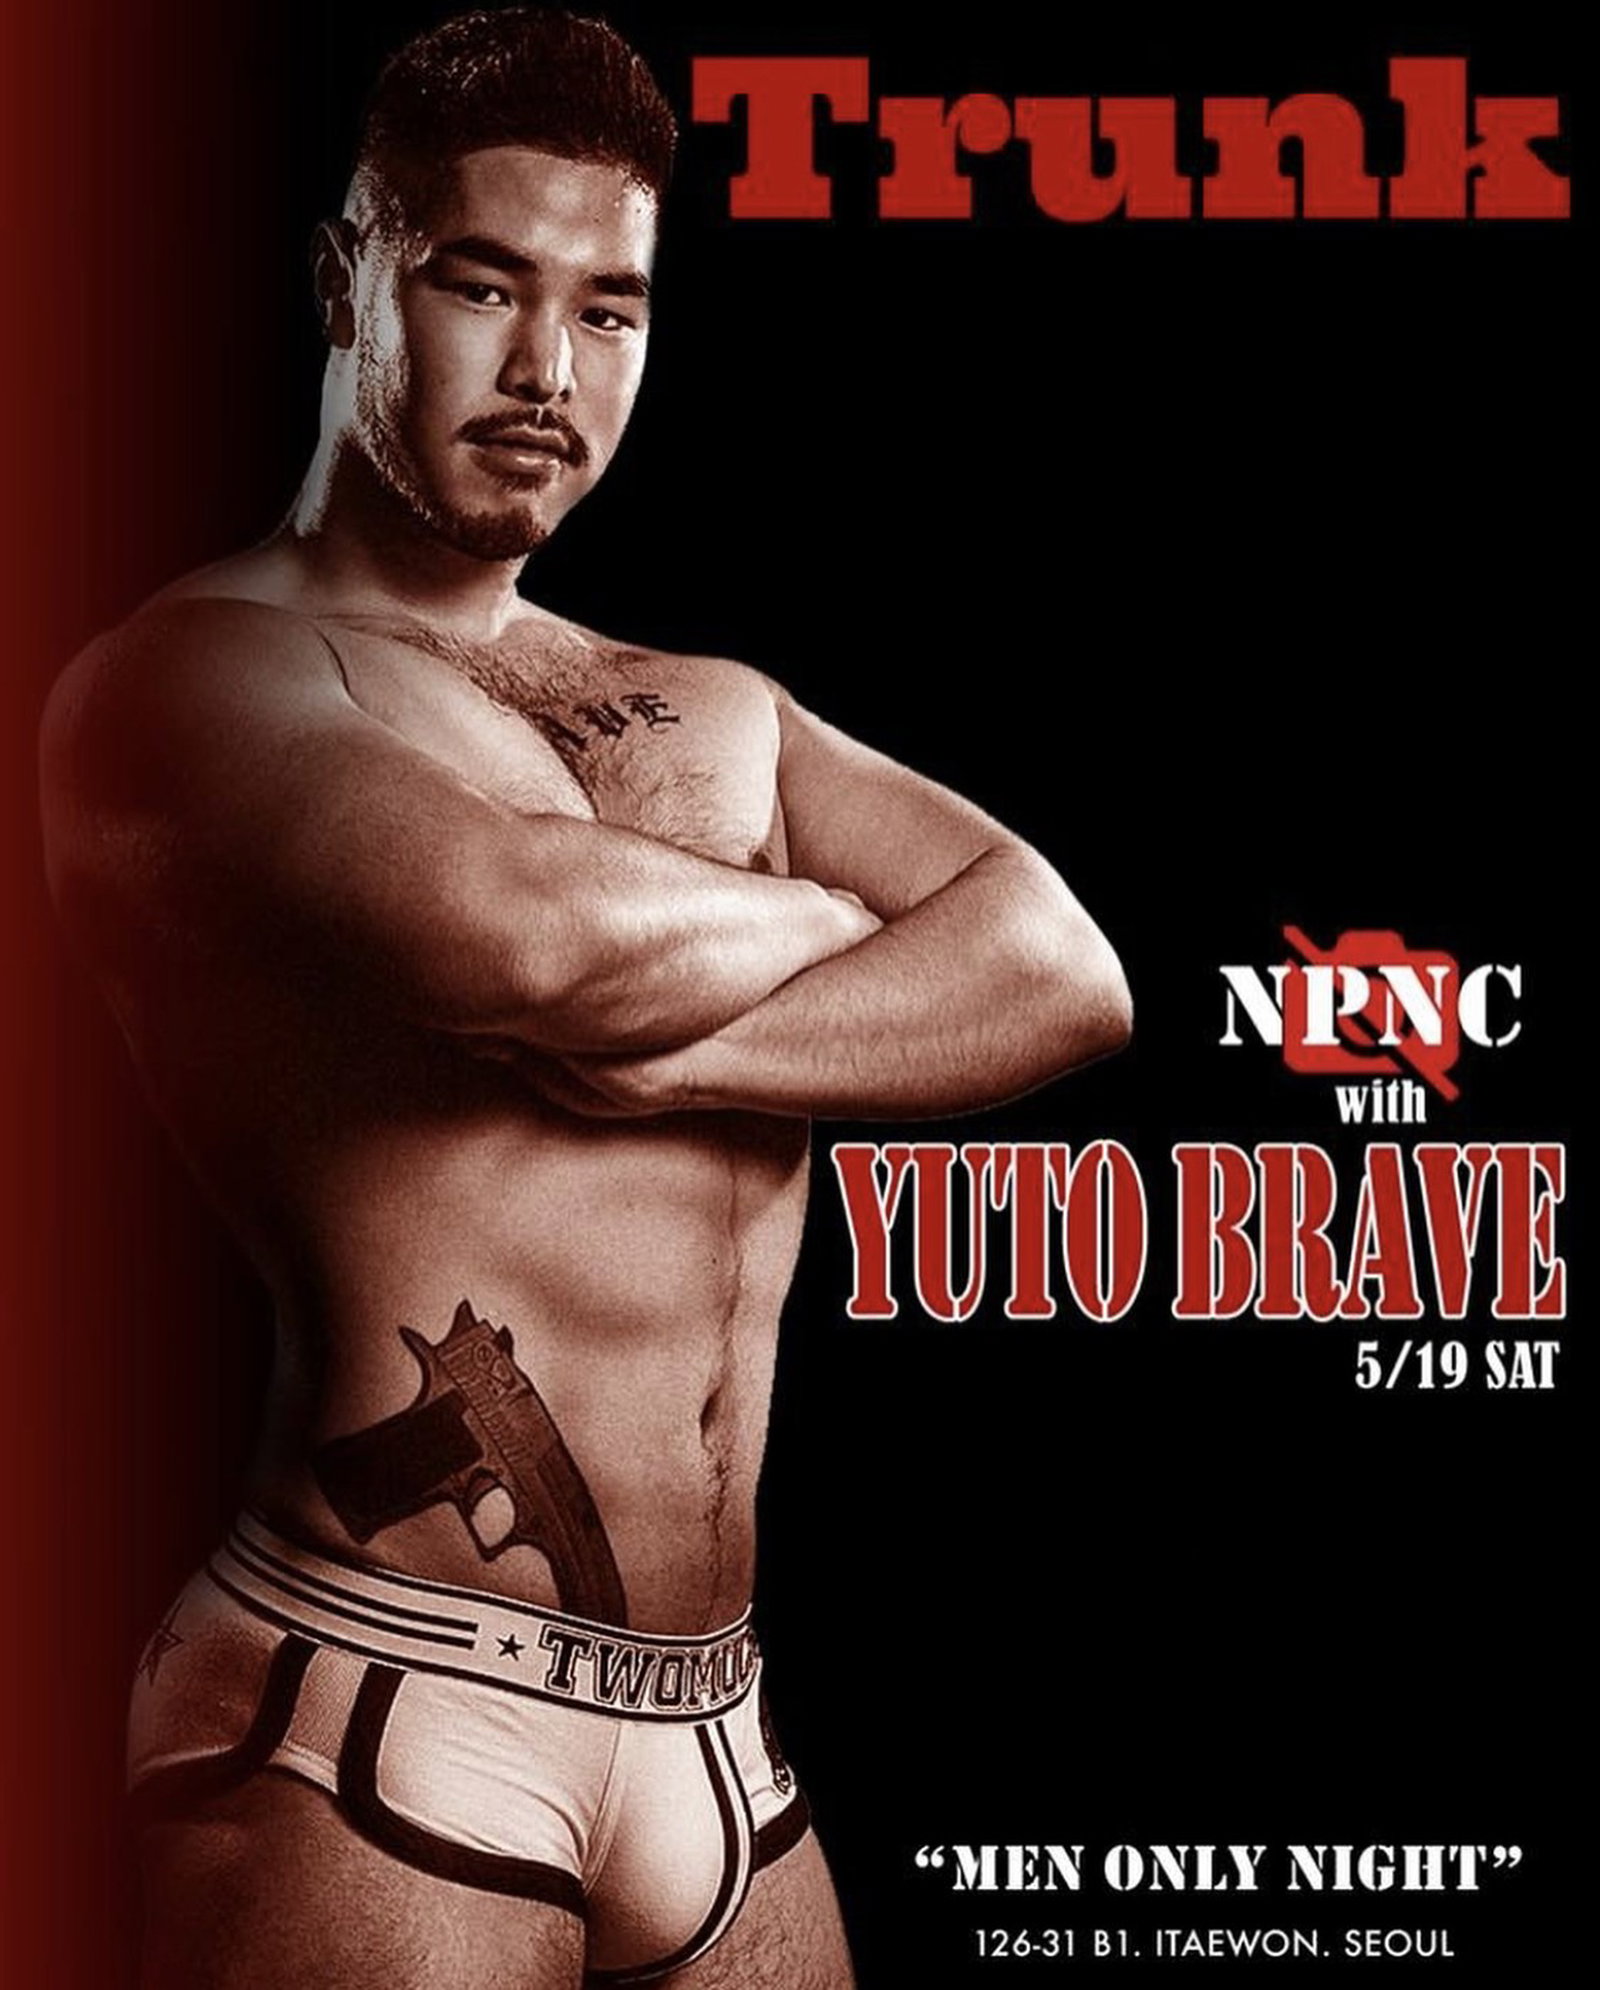 Watch the Photo by R__gay with the username @Rgay, posted on April 25, 2019. The post is about the topic Gay Asians. and the text says 'Yuto Brave (Instagram)'